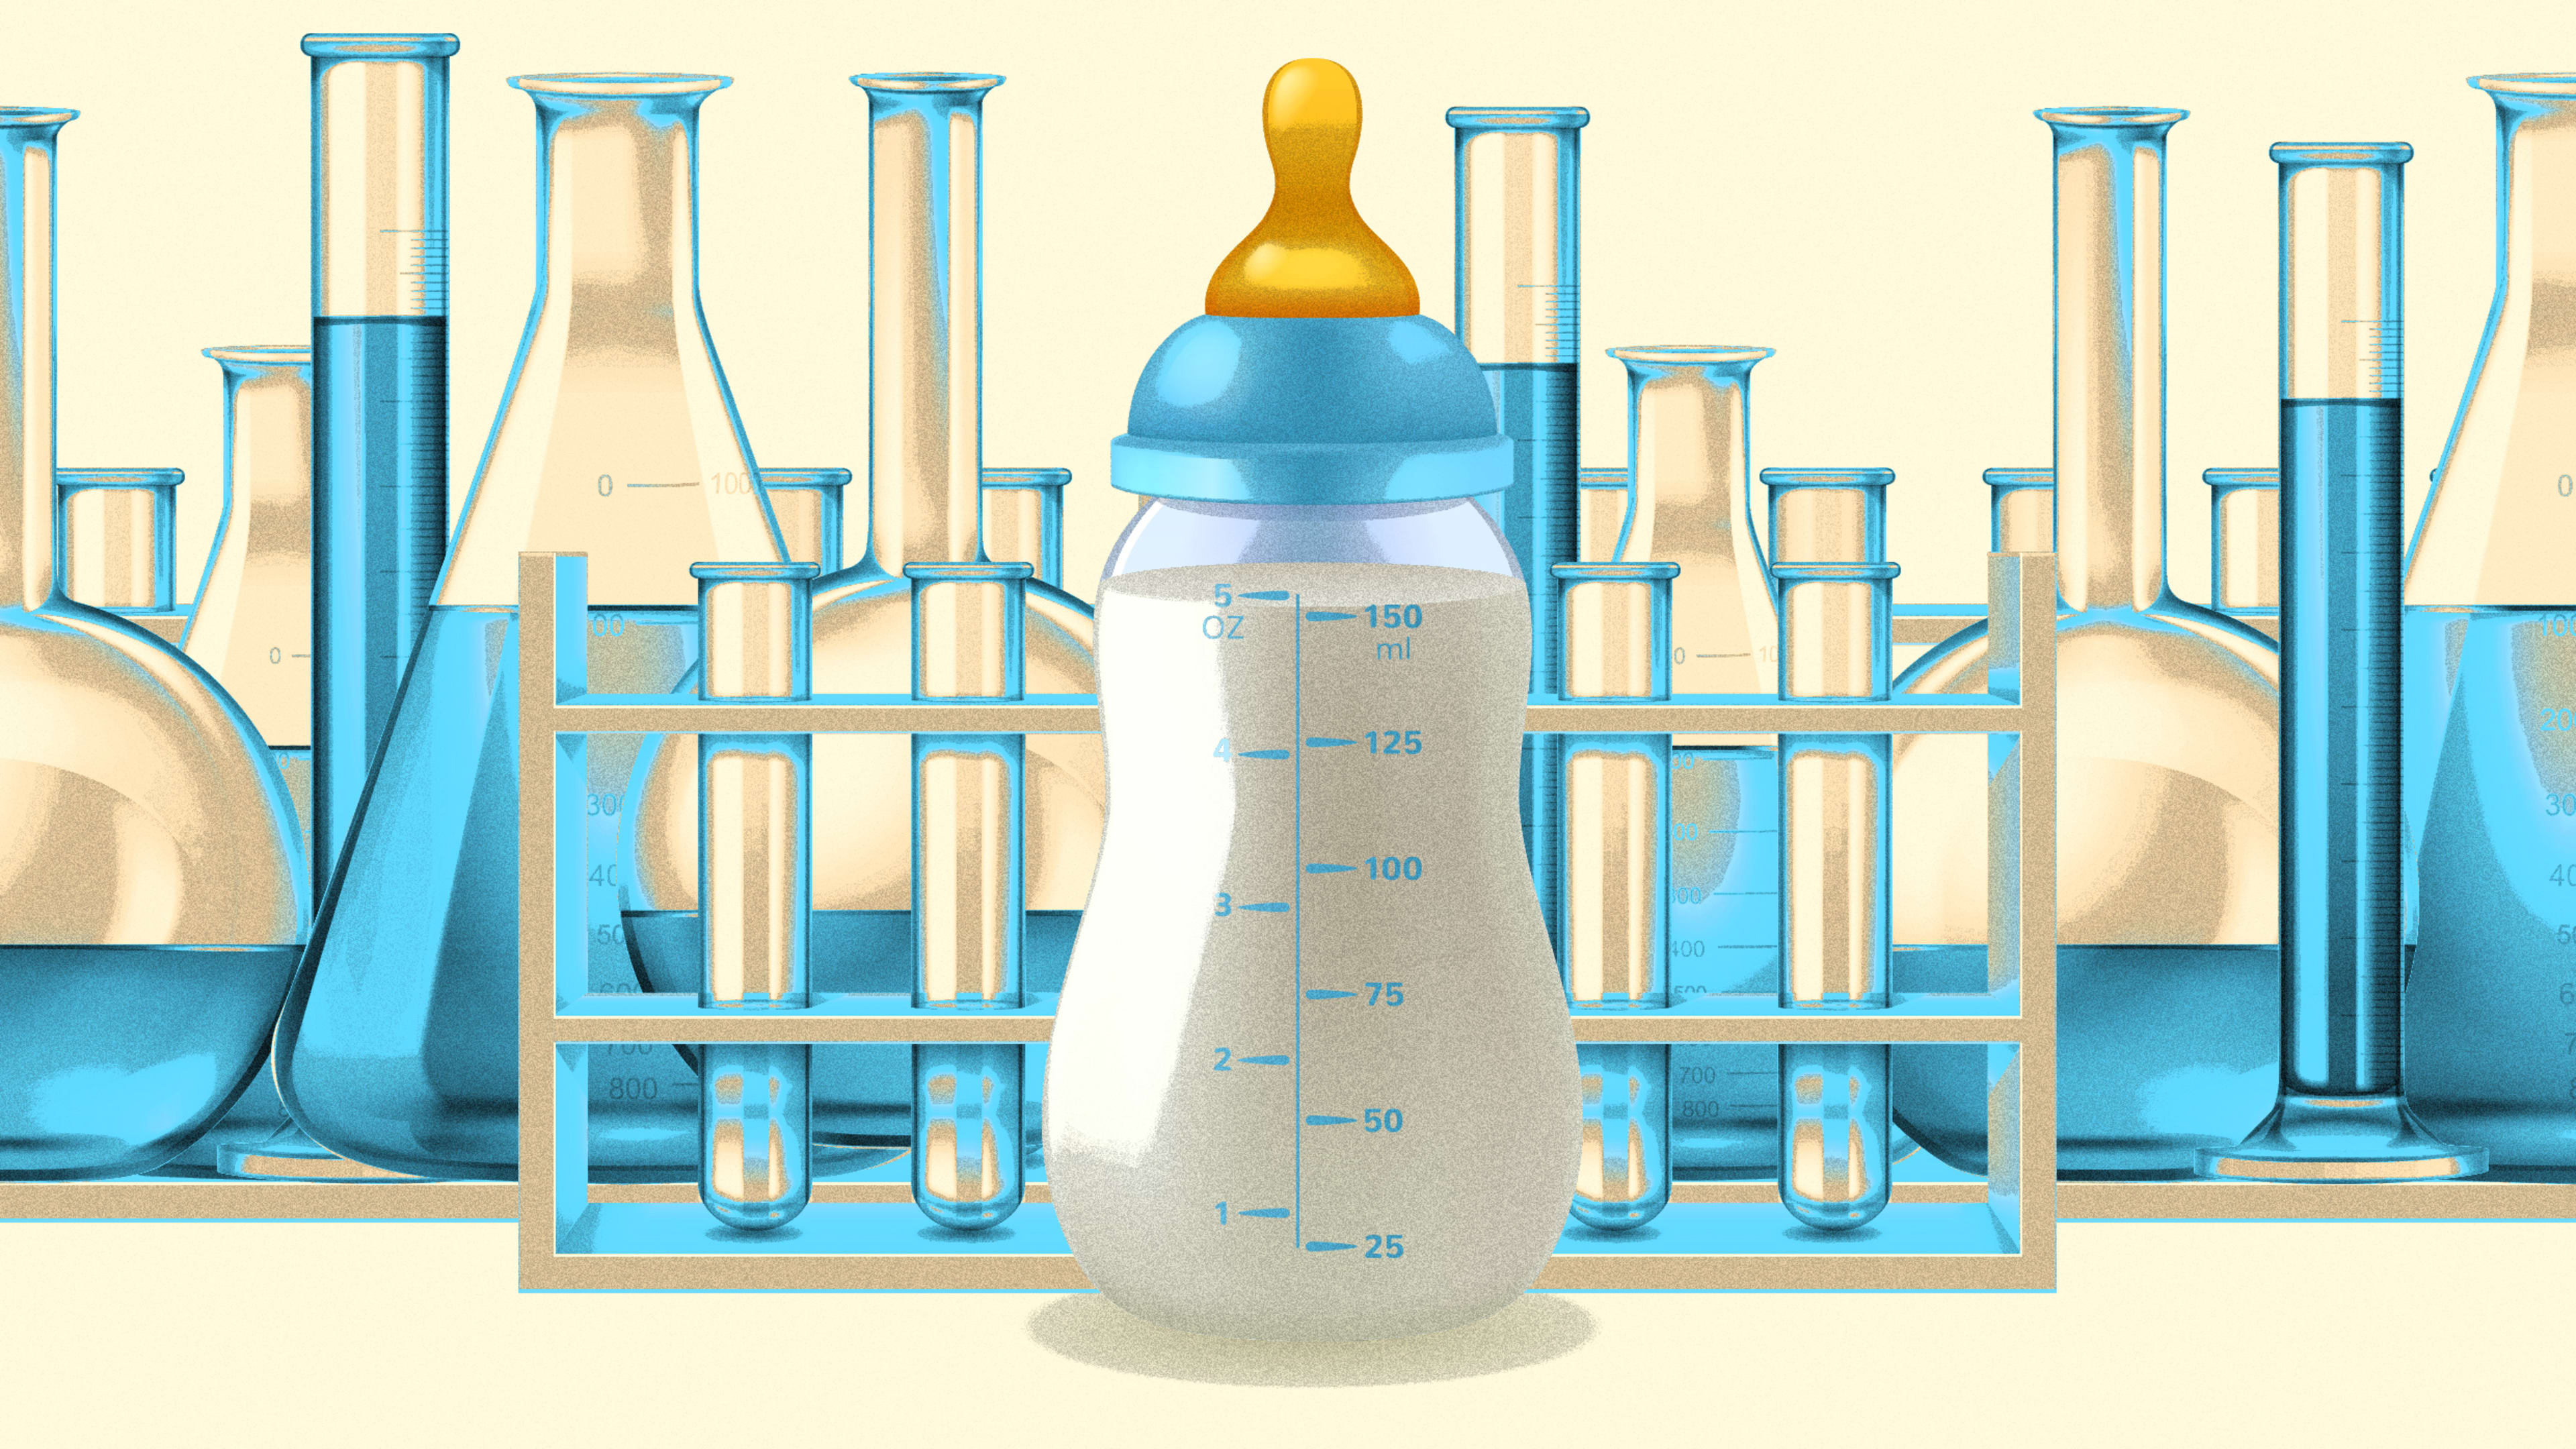 Scientists have figured out how to grow breast milk in a lab